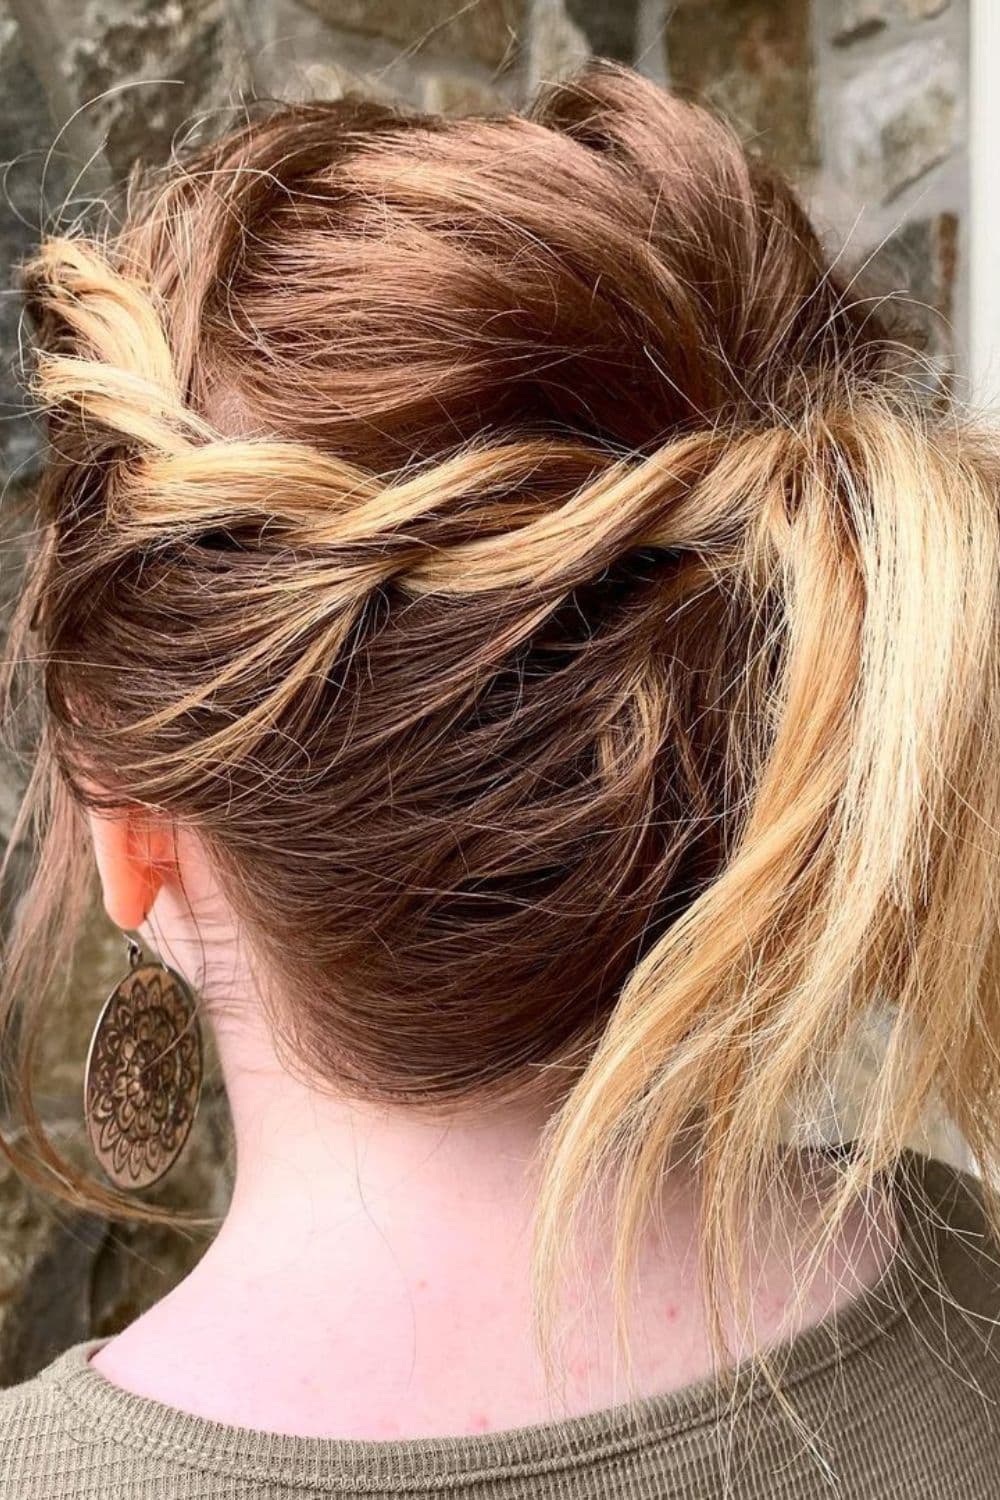 A woman with brown and blonde twisted half ponytail.